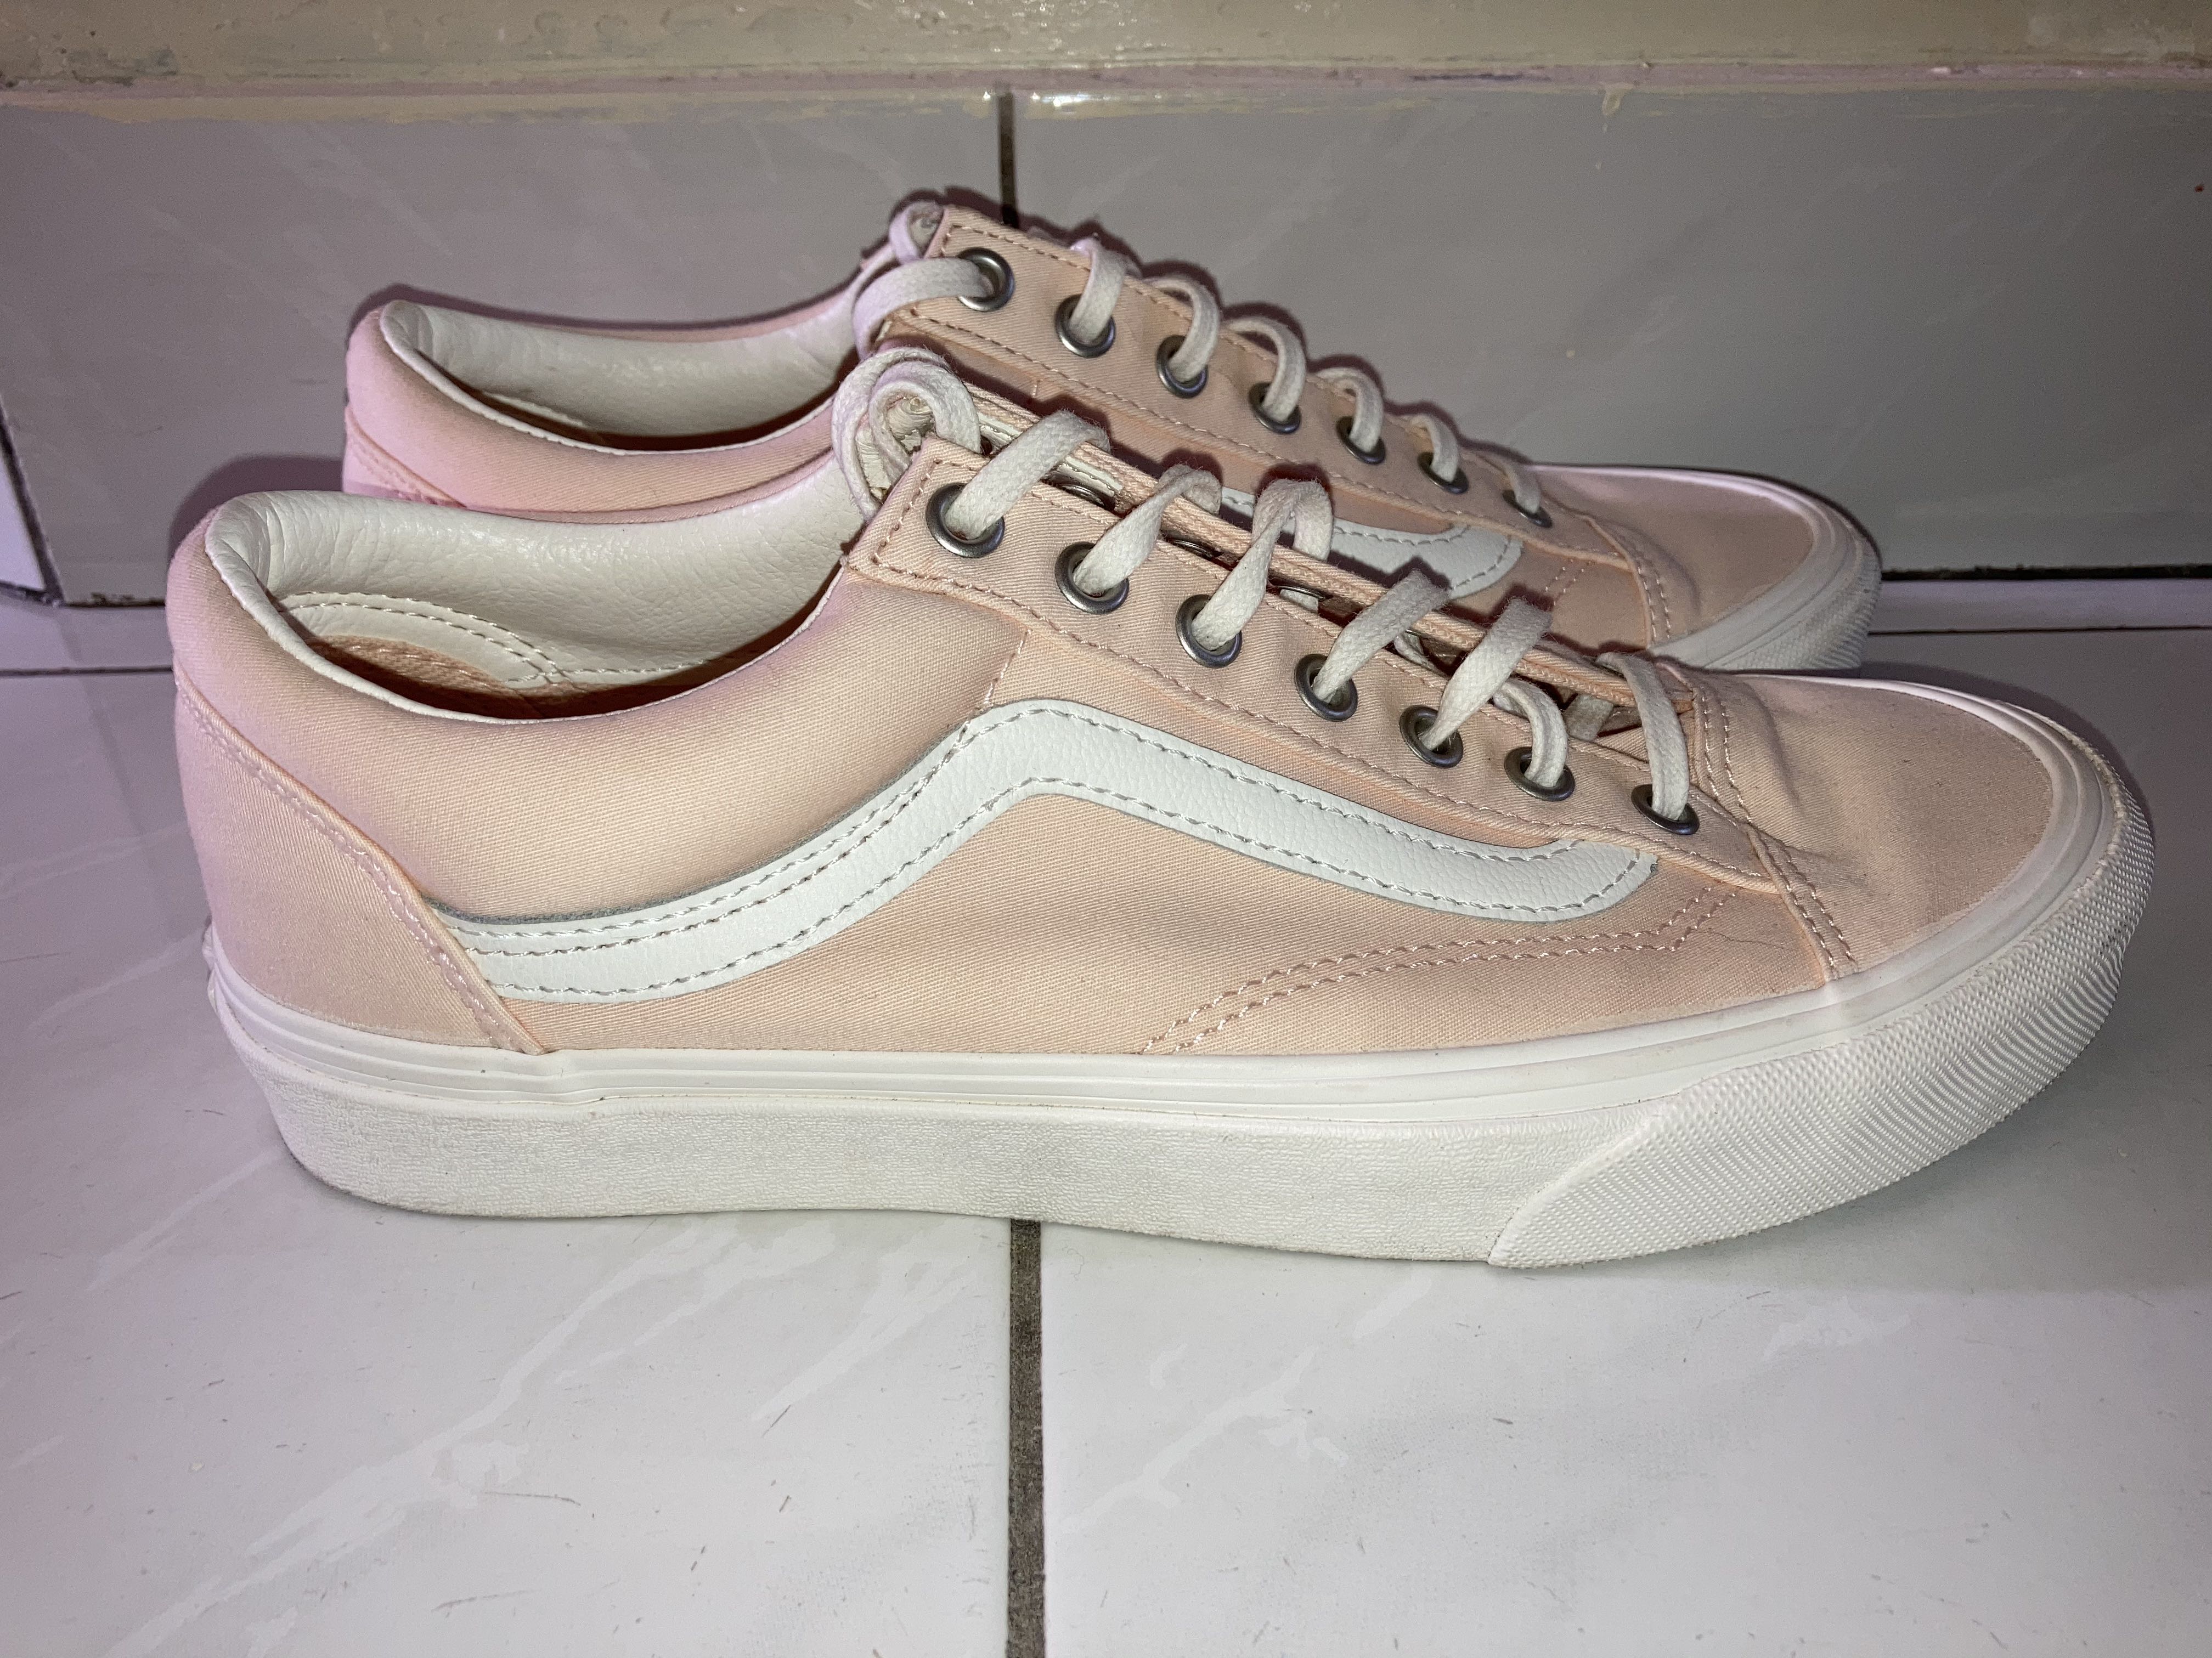 VANS STYLE 36 BRUSHED TWILL SNEAKERS 